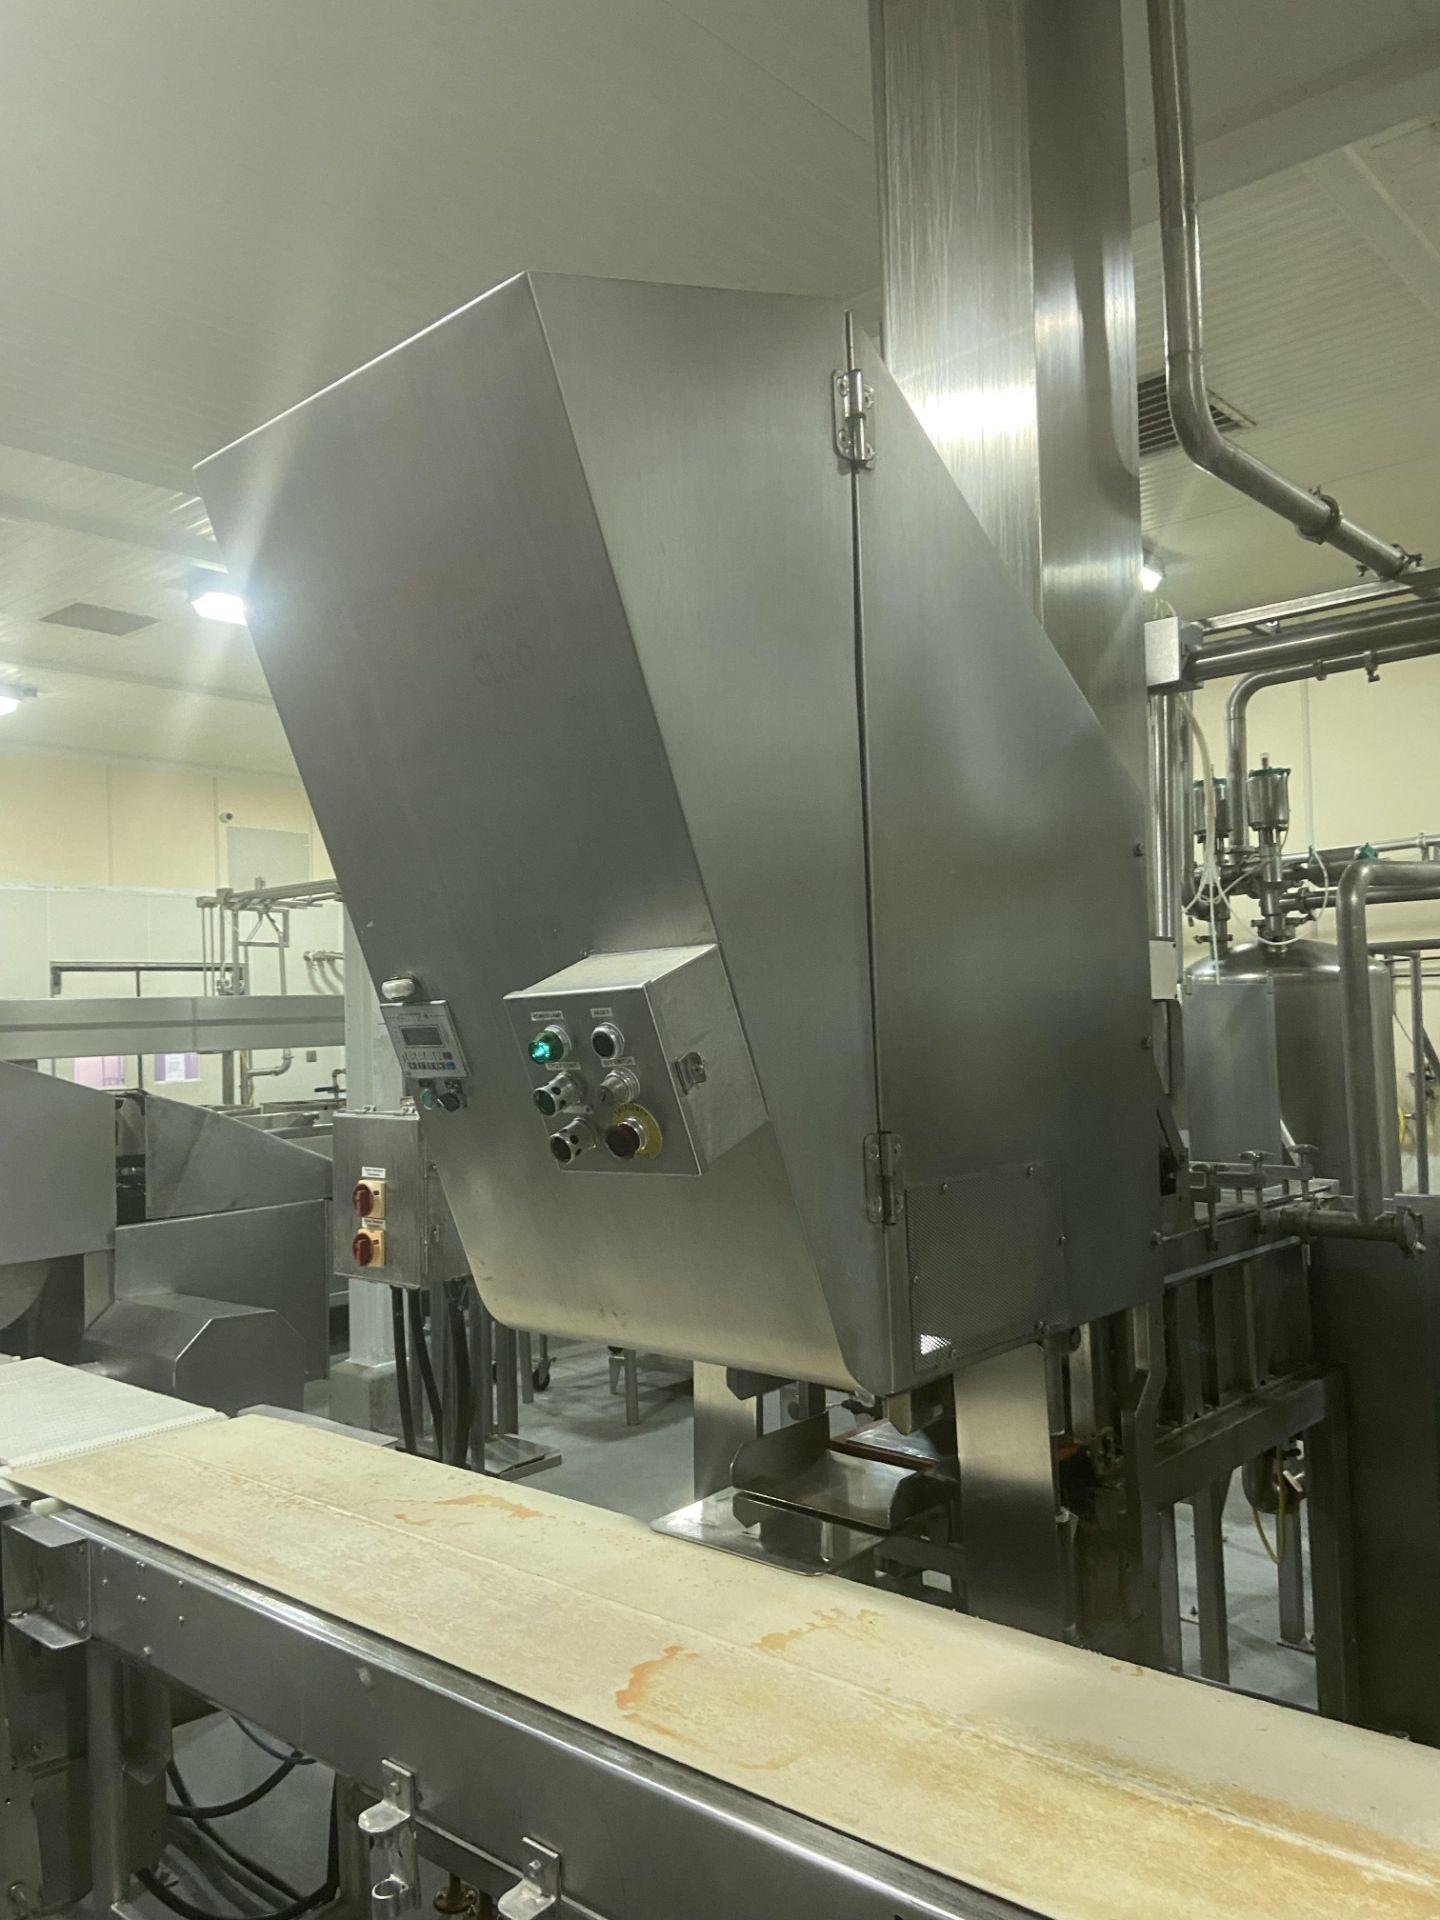 Stoelting (Relco)S/S Cheese Blocker with Cyrovac CL20 Bagger, M/N C120, S/N 01103, with - Image 2 of 12